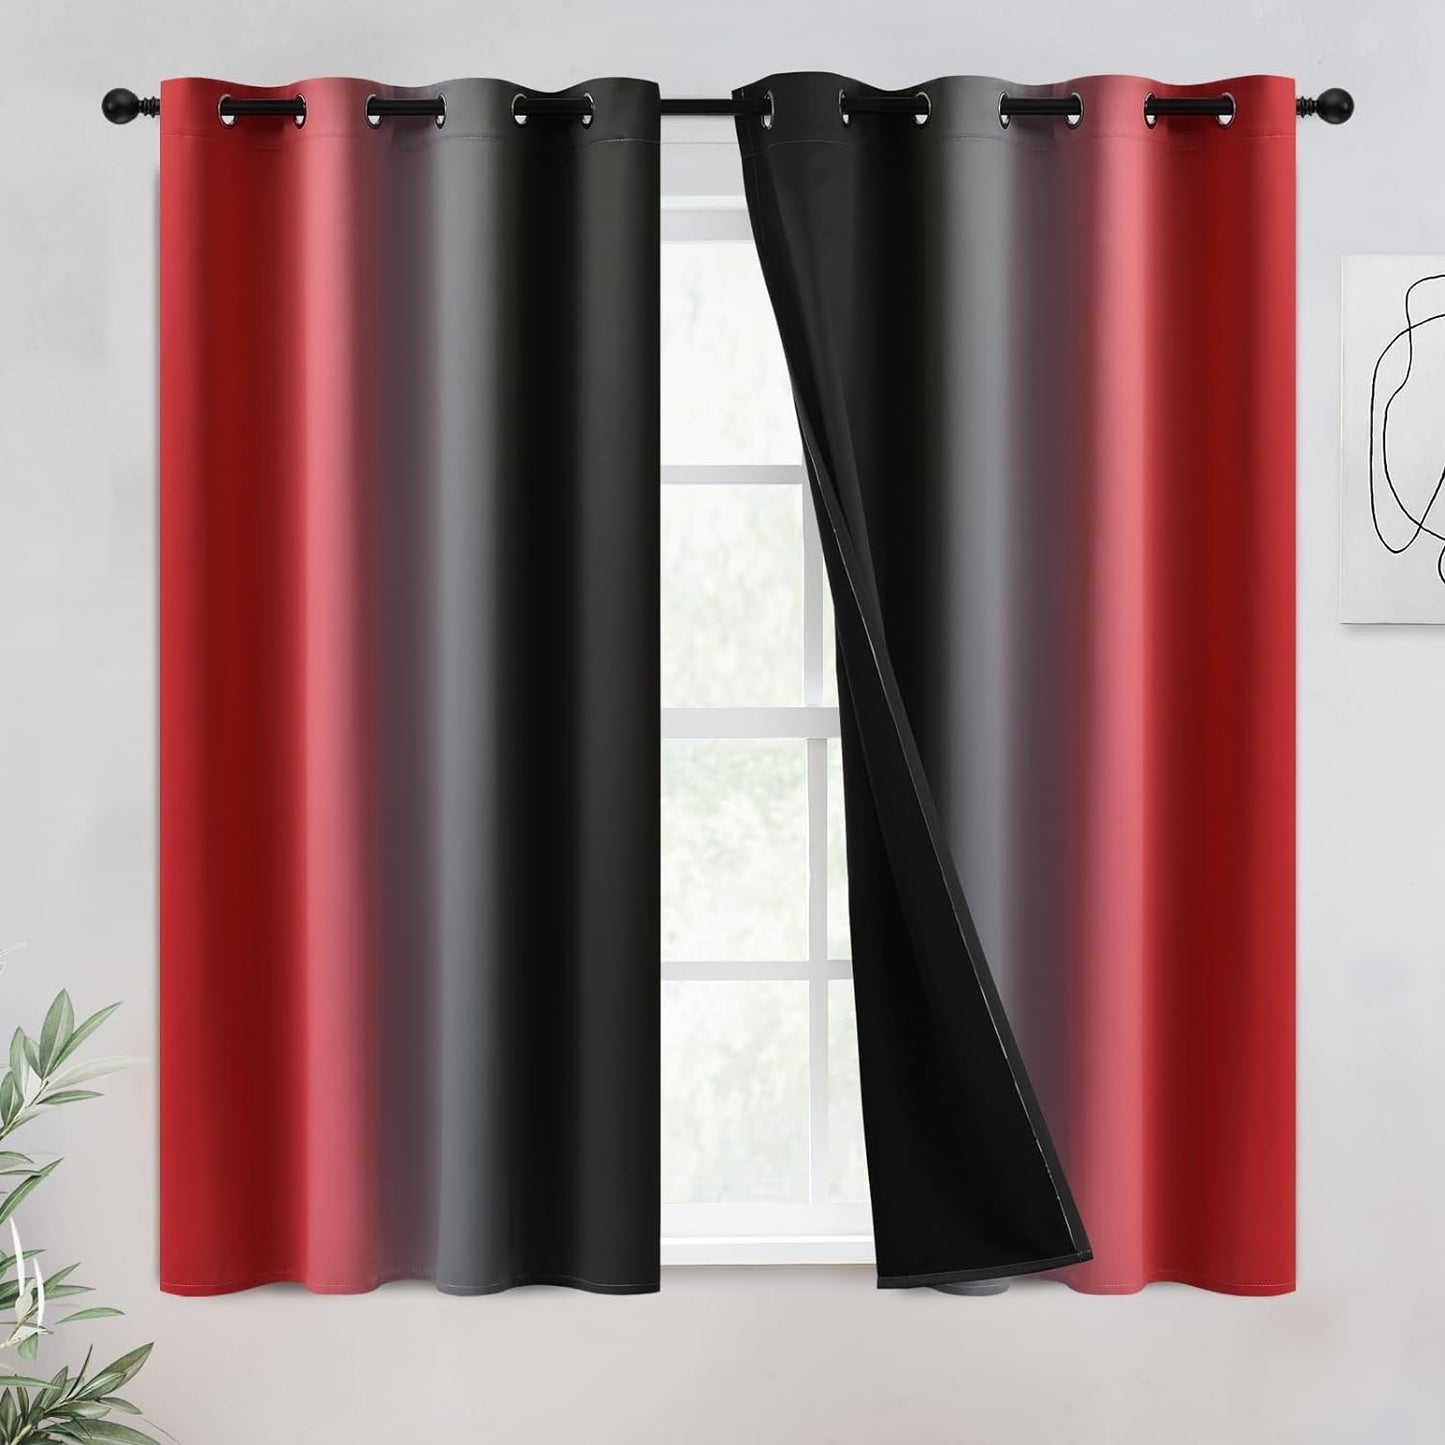 COSVIYA 100% Blackout Curtains & Drapes Ombre Purple Curtains 63 Inch Length 2 Panels,Full Room Darkening Grommet Gradient Insulated Thermal Window Curtains for Bedroom/Living Room,52X63 Inches  COSVIYA Blackout Red And Black 52W X 54L 